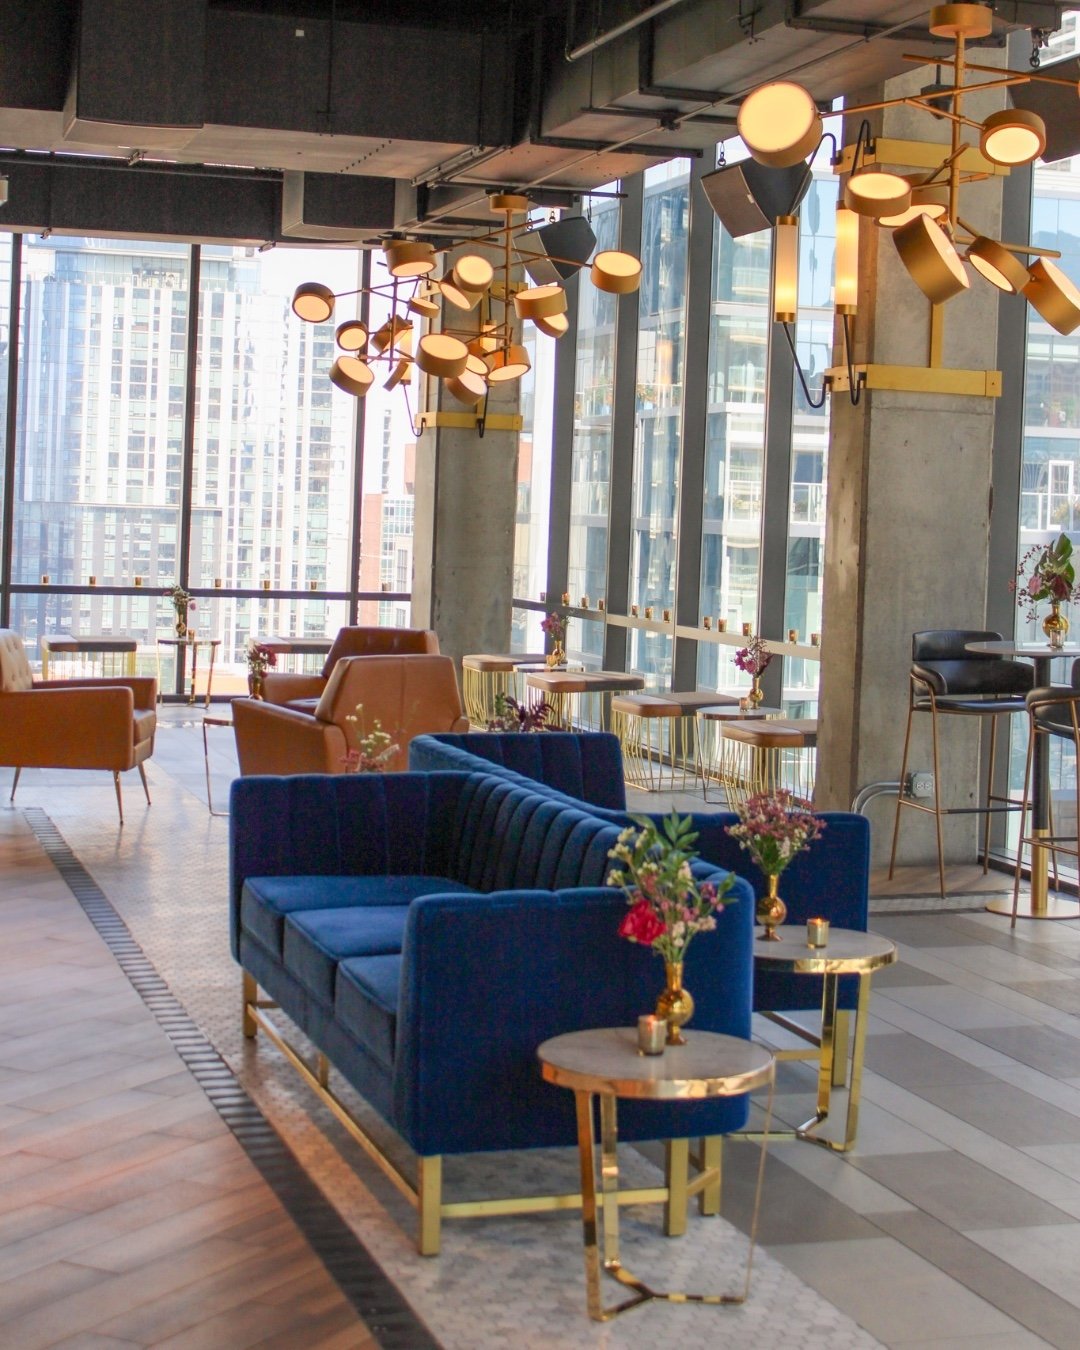 Grab a drink, have a seat, and enjoy the stunning views of River North at Twenty-Six 🥂✨
.
.
.
#twentysixchicago #eventvenue #chicagoevents #weddingreception #chicagowedding #weddingvenue #chicagoeventvenue #chicagoeventplanner #magnificentmile #even